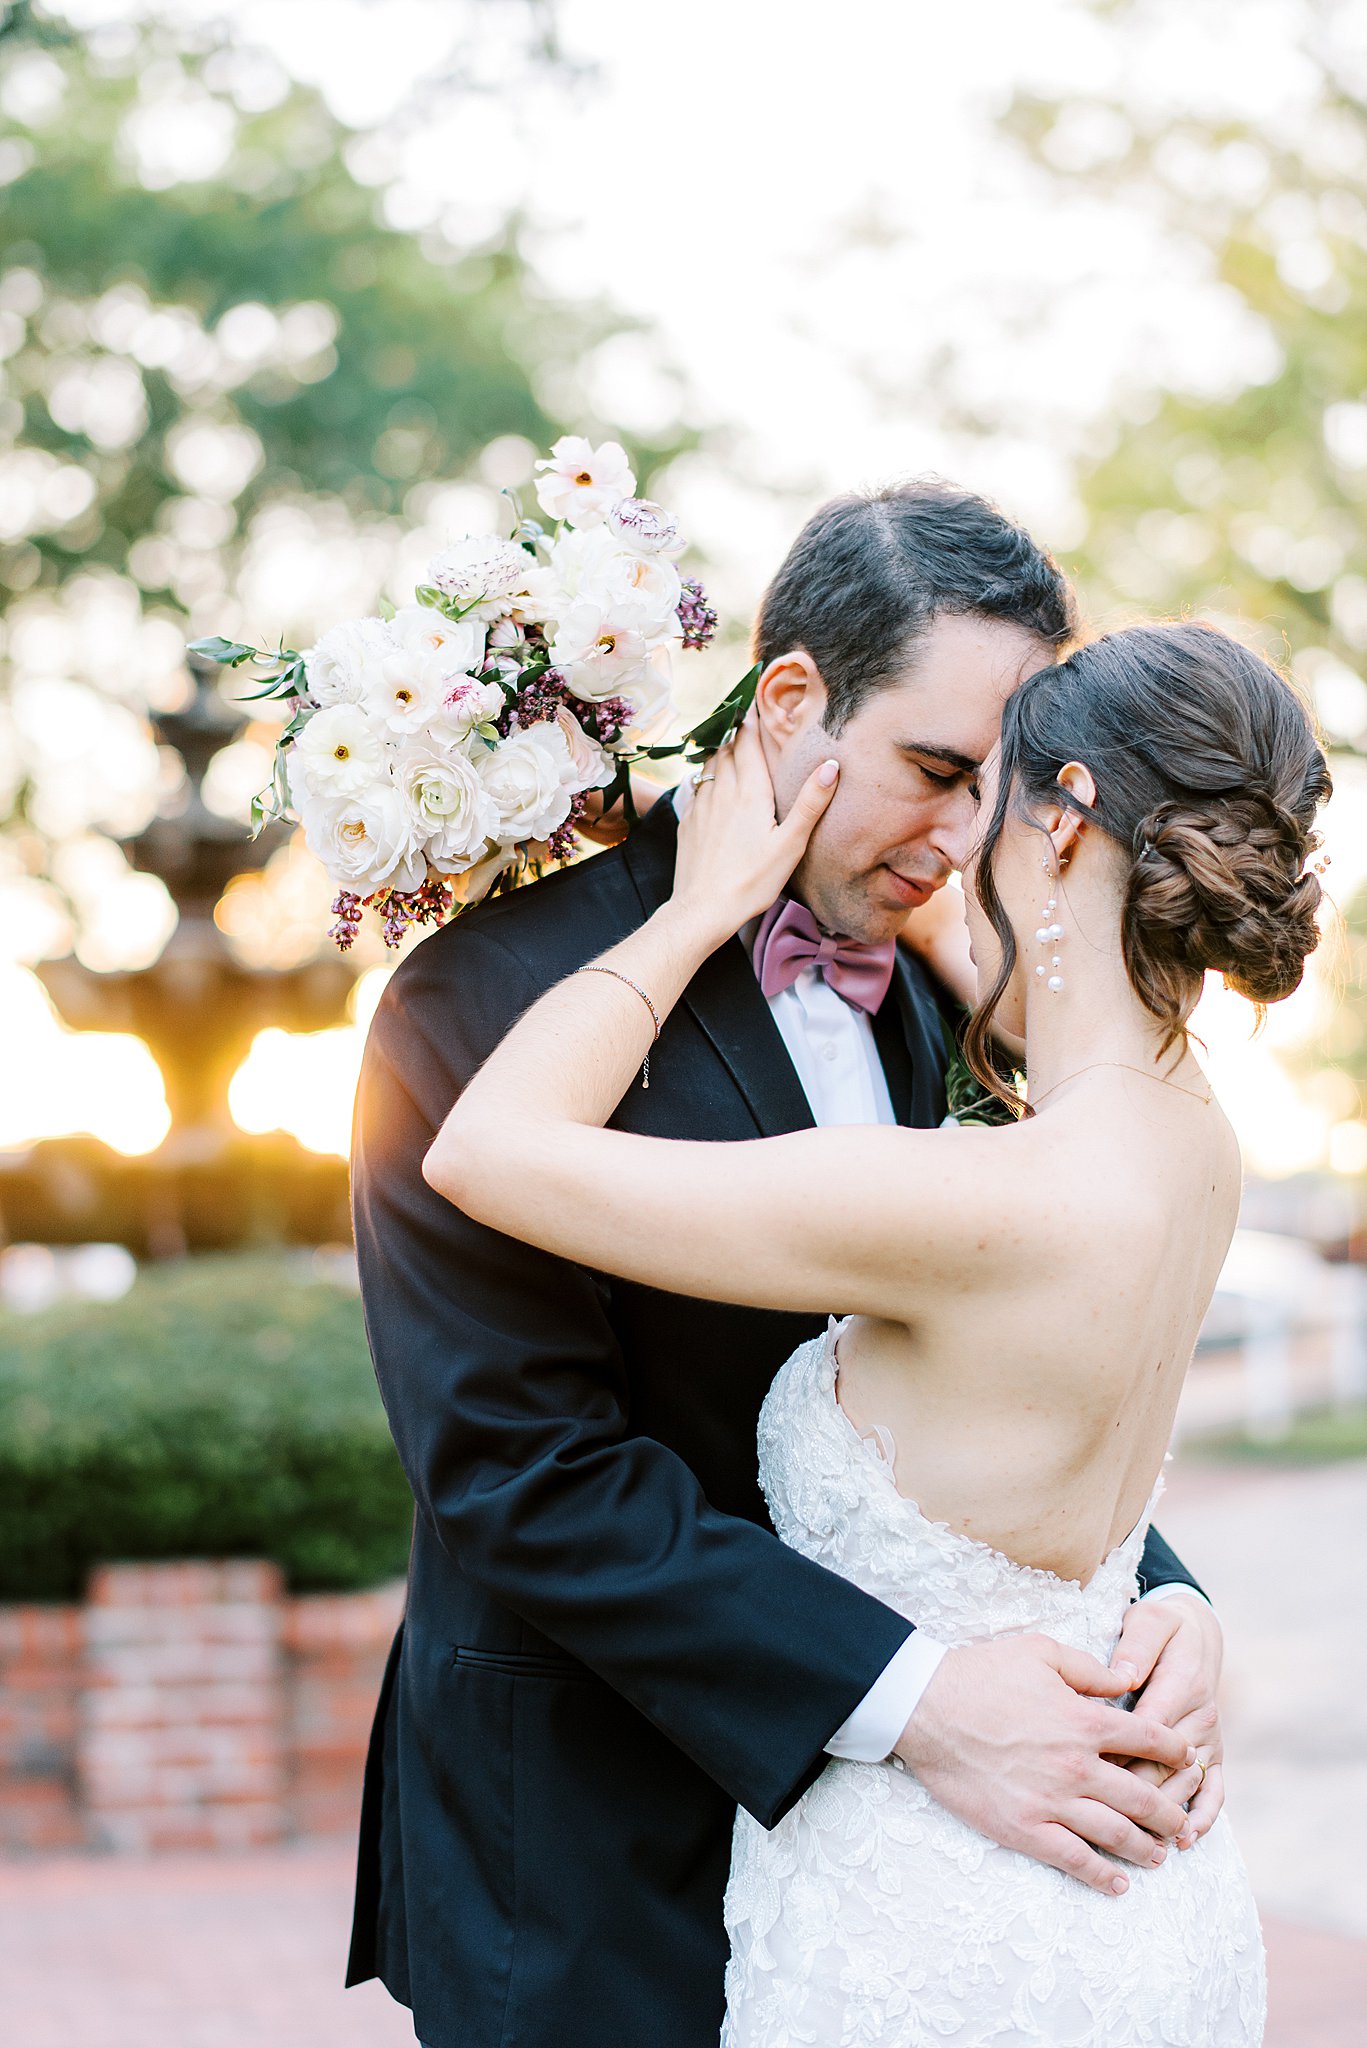 Newlyweds embrace with a pink bowtie and lace dress at sunset in a garden at Brawley Estate